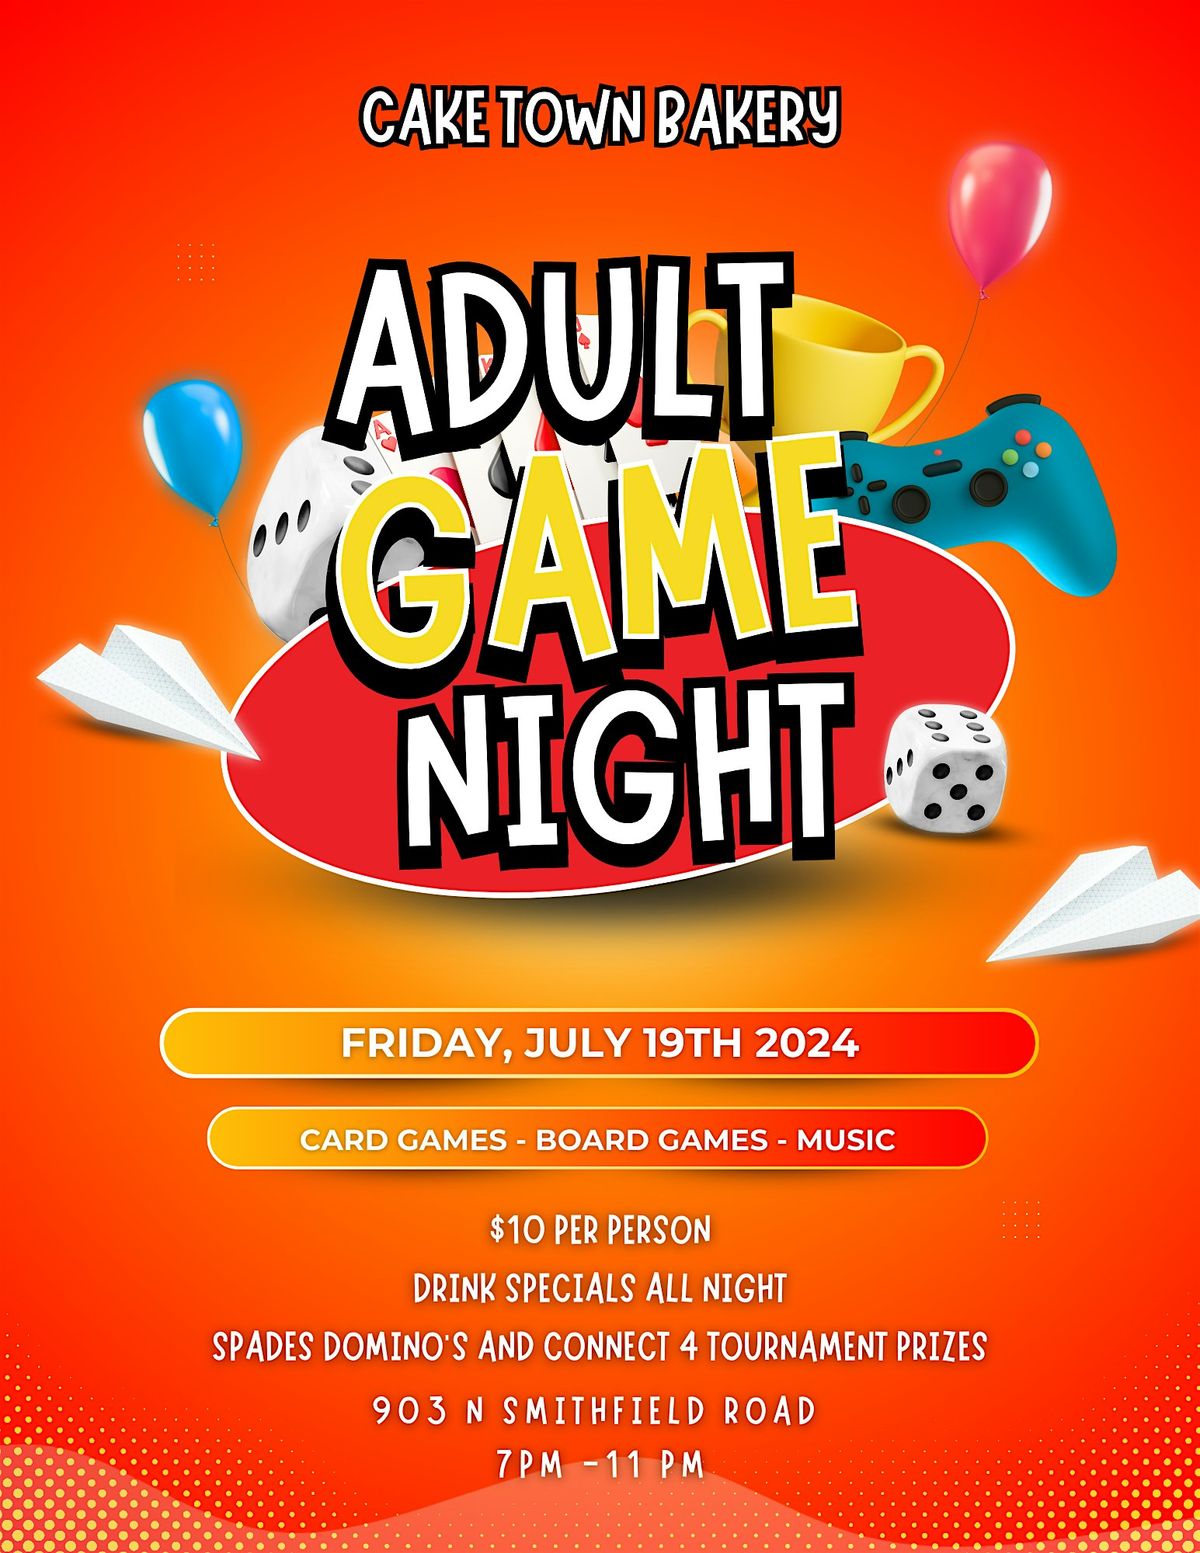 Cake Town Bakery Presents: Adult Game Night